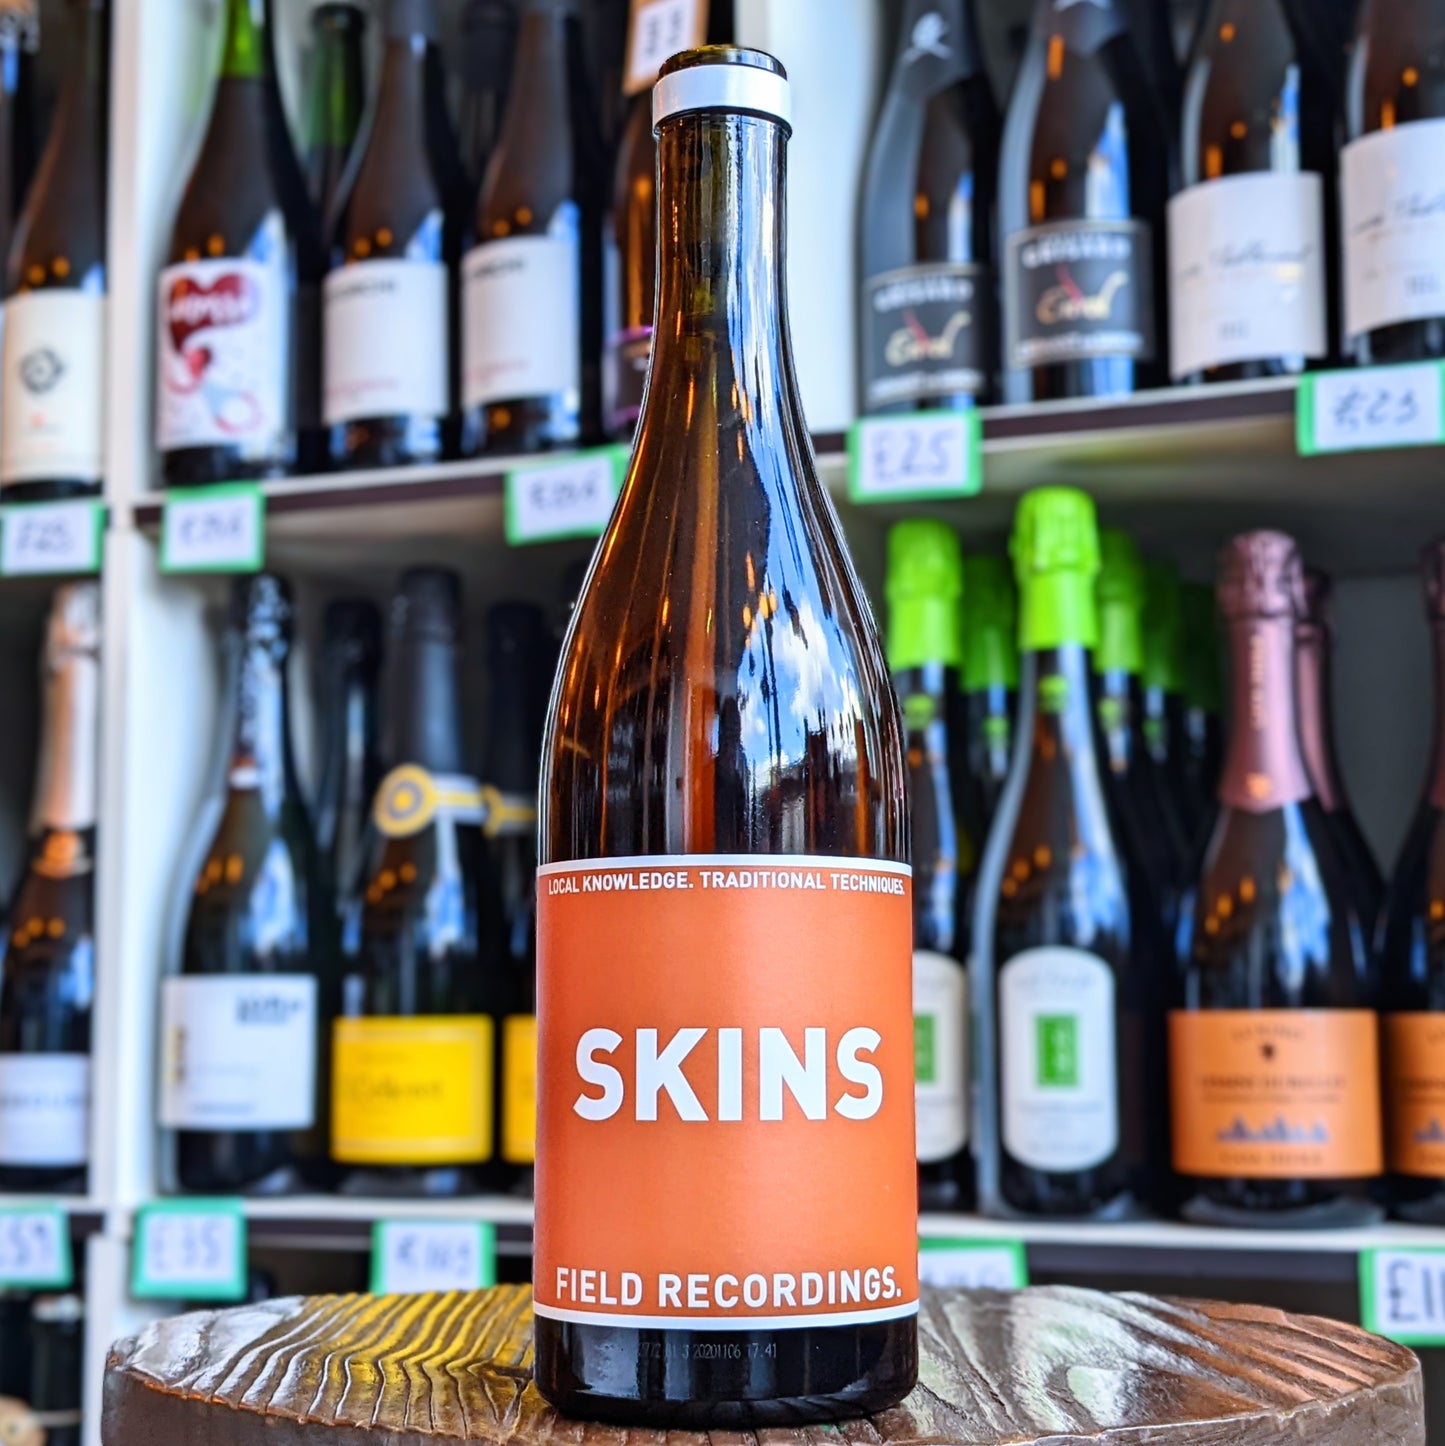 Field Recordings, 'Skins', Chenin Blanc / Pinot Gris, Central Coast, California, United States